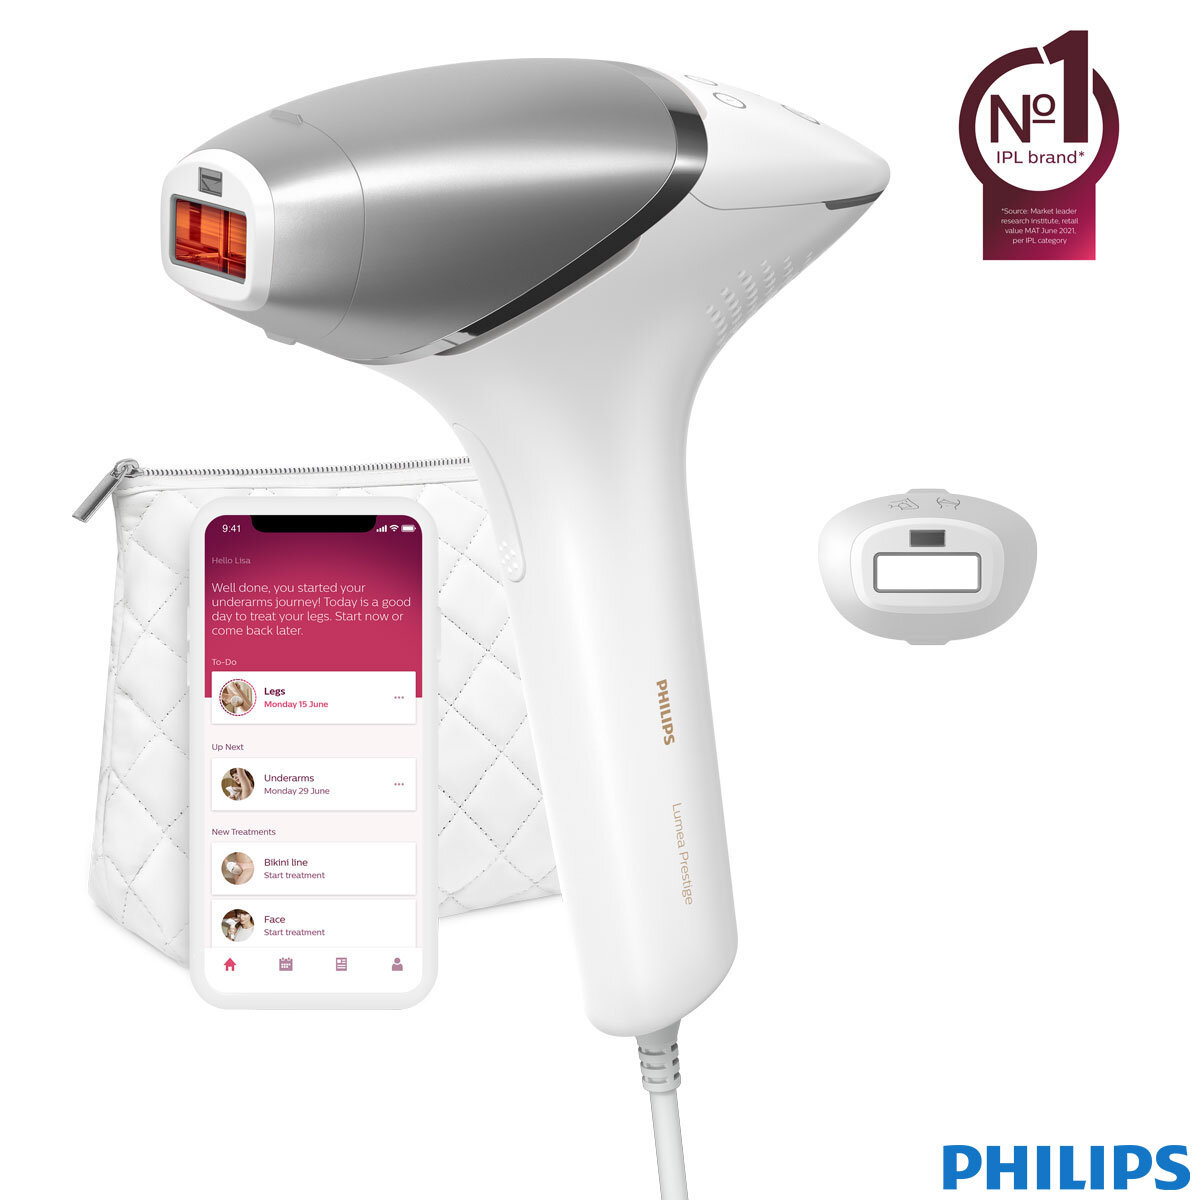 Image of Philips Lumea IPL with attachments and app